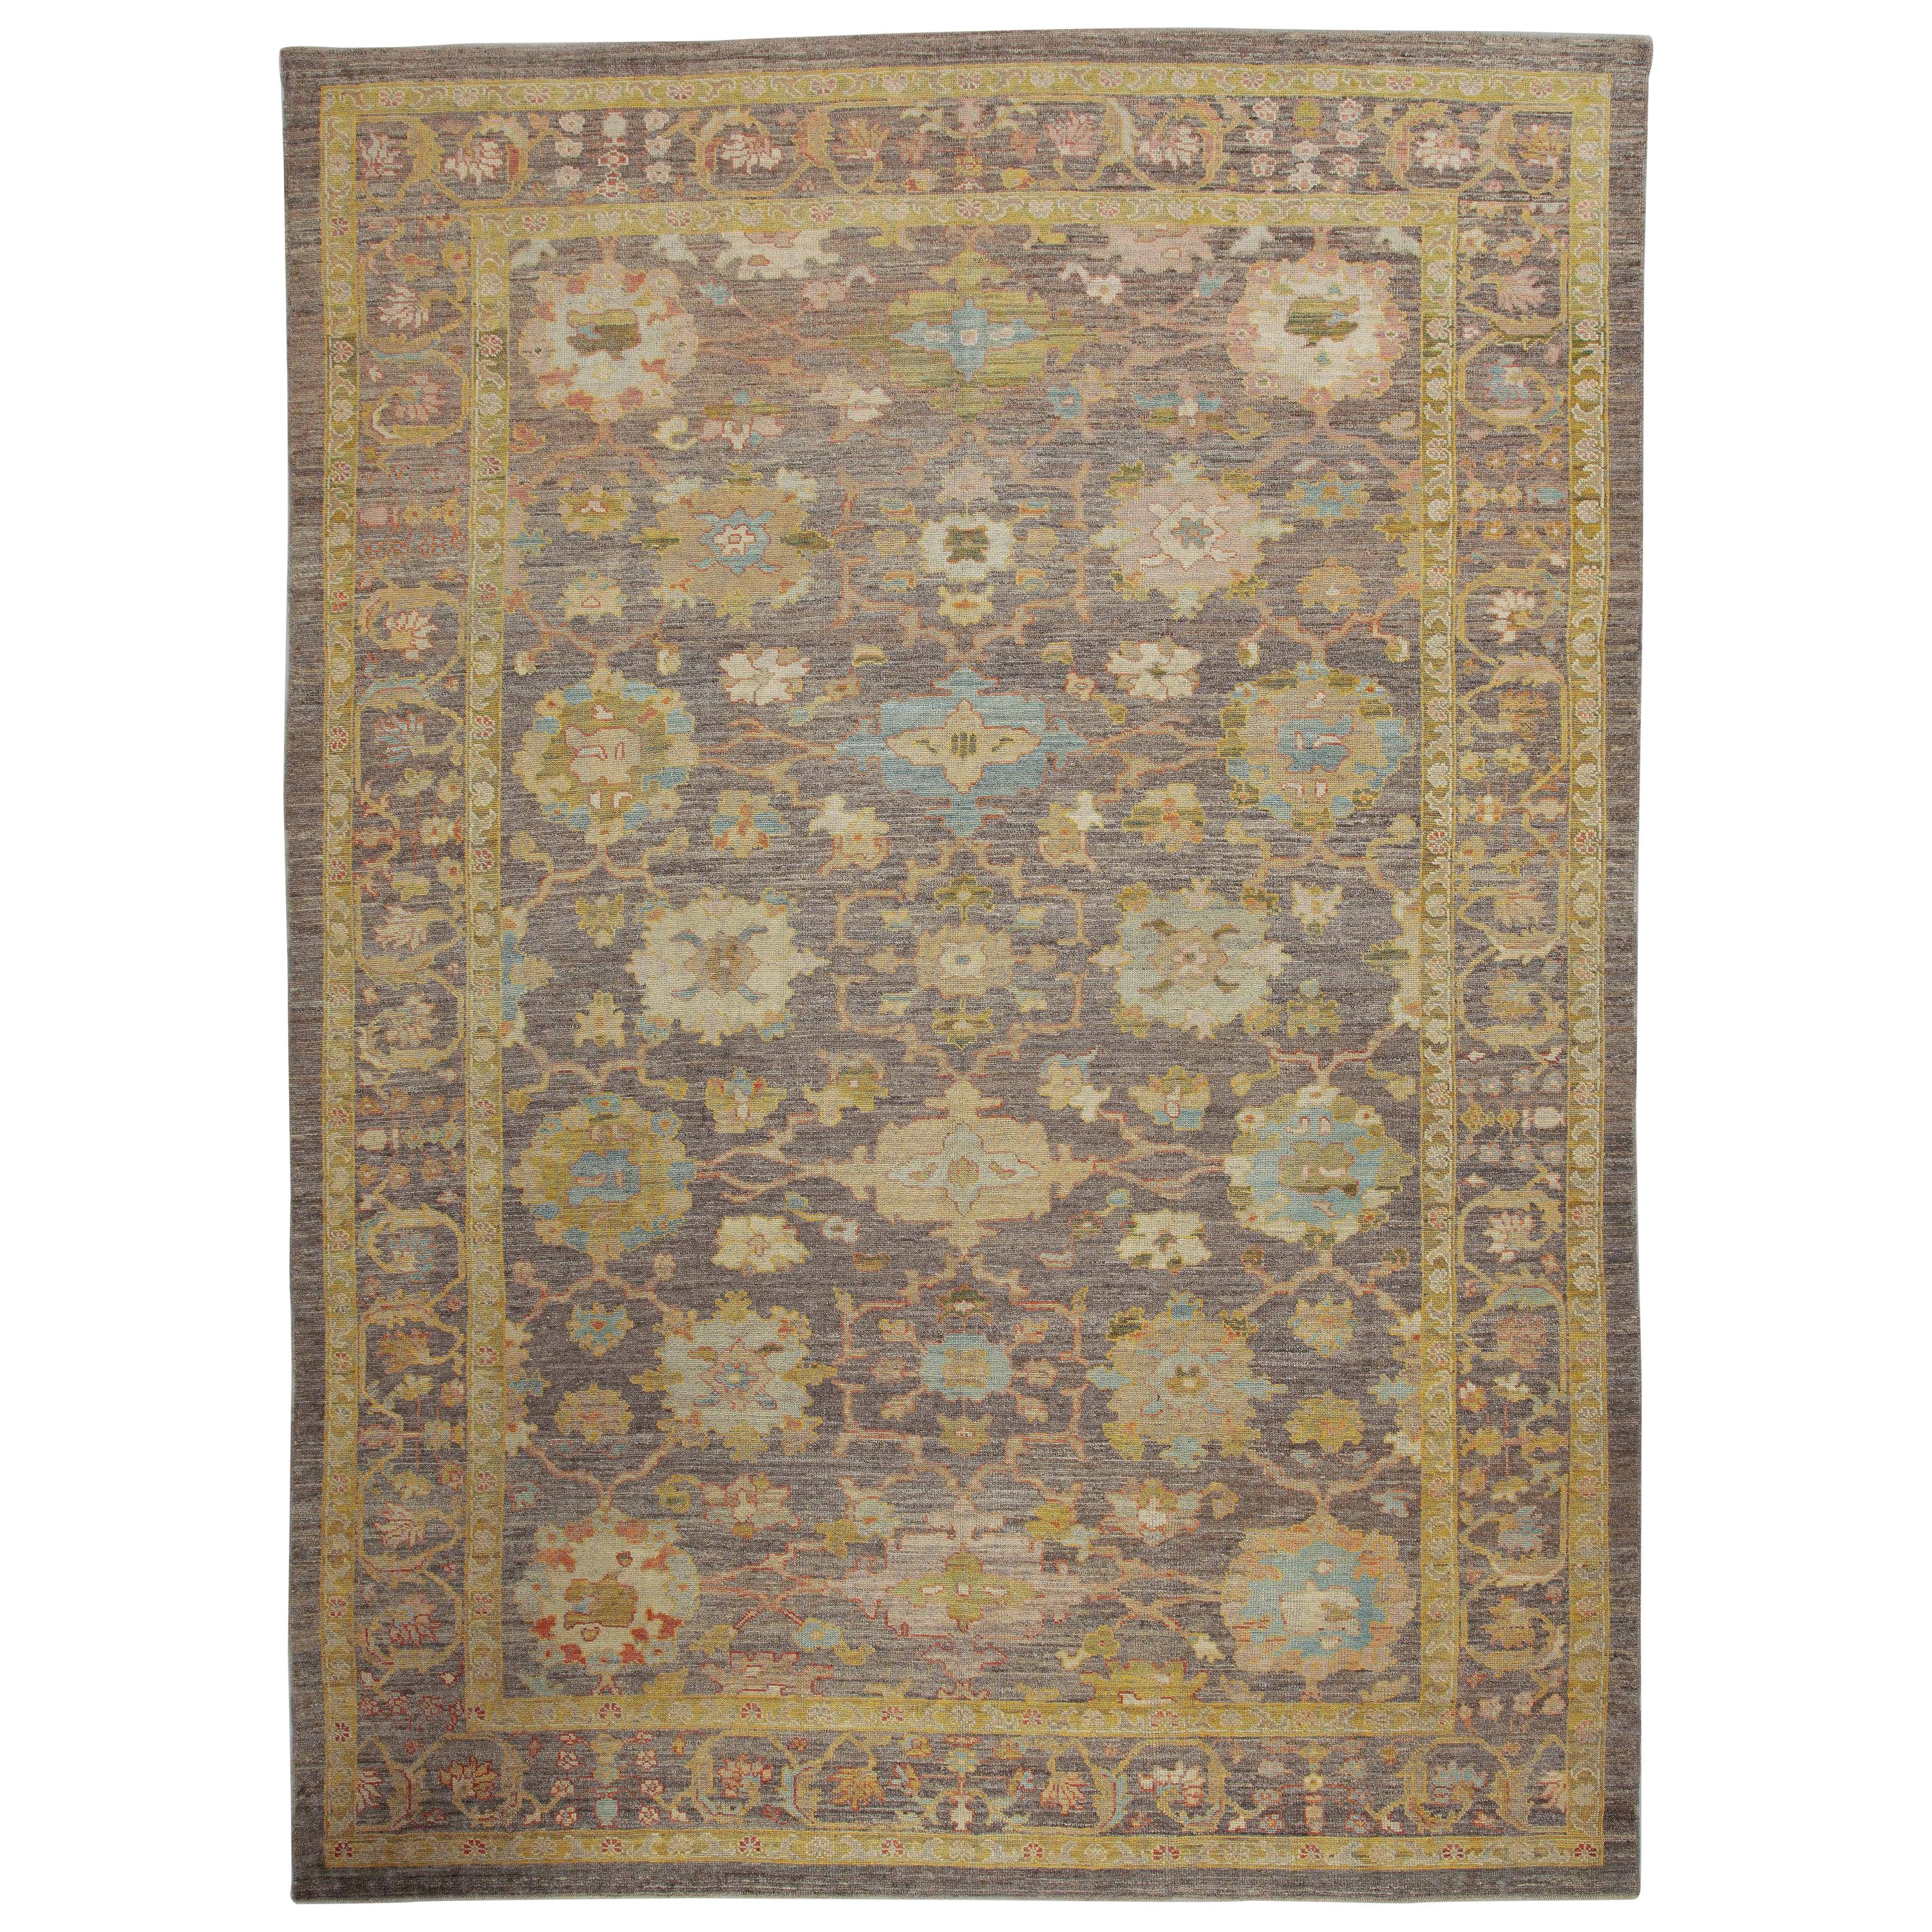 Modern Turkish Oushak Rug with Multicolored All-Over Floral Details